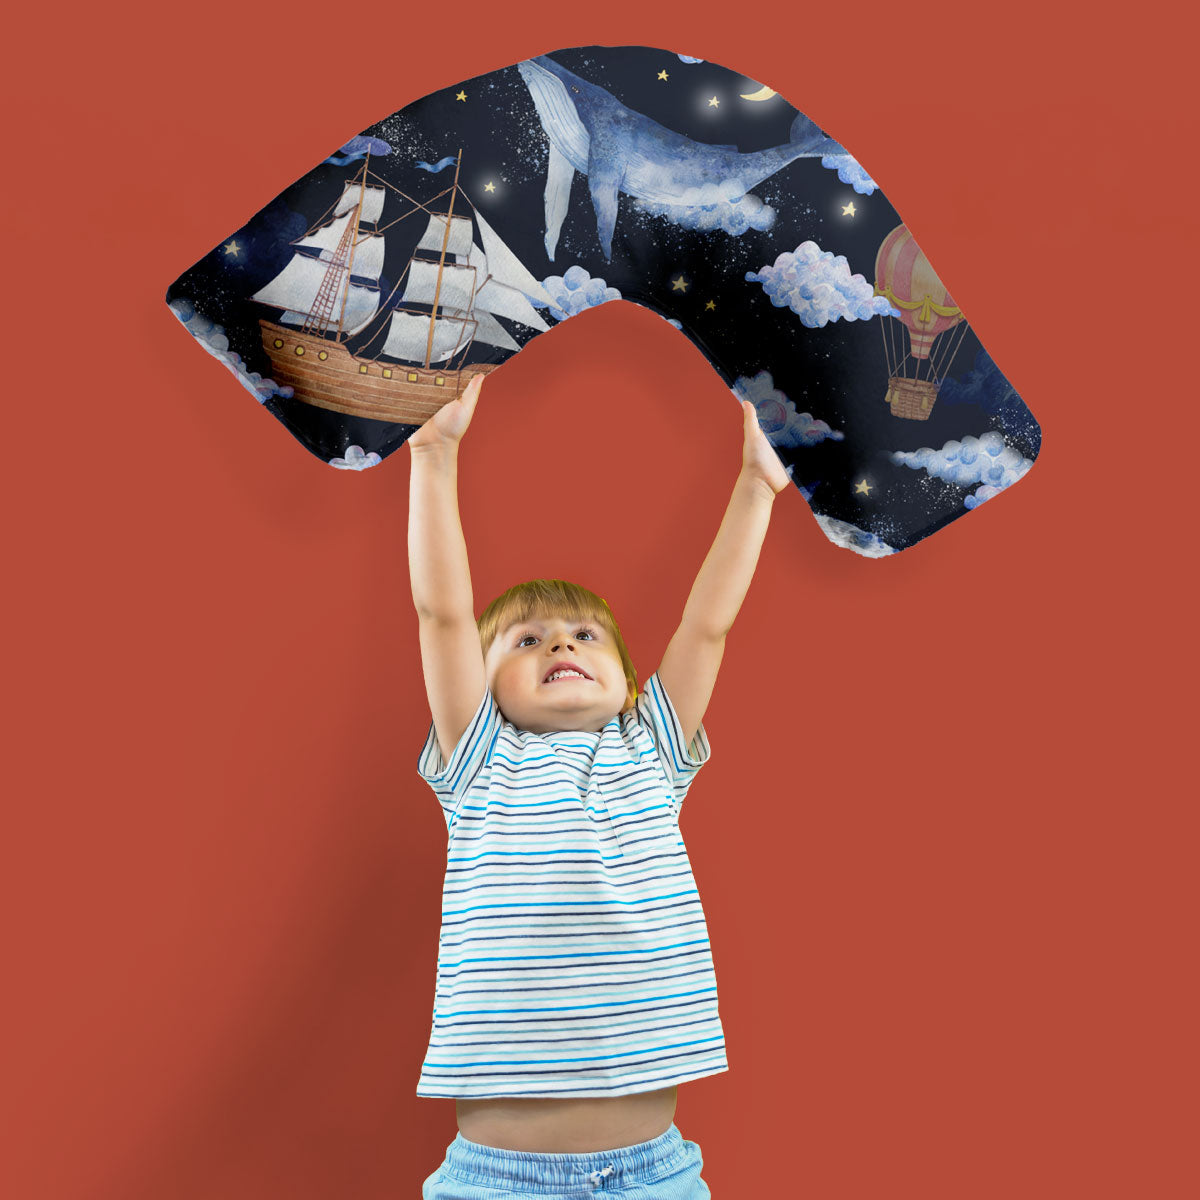 In The Night Curved Sensory Pillowcase